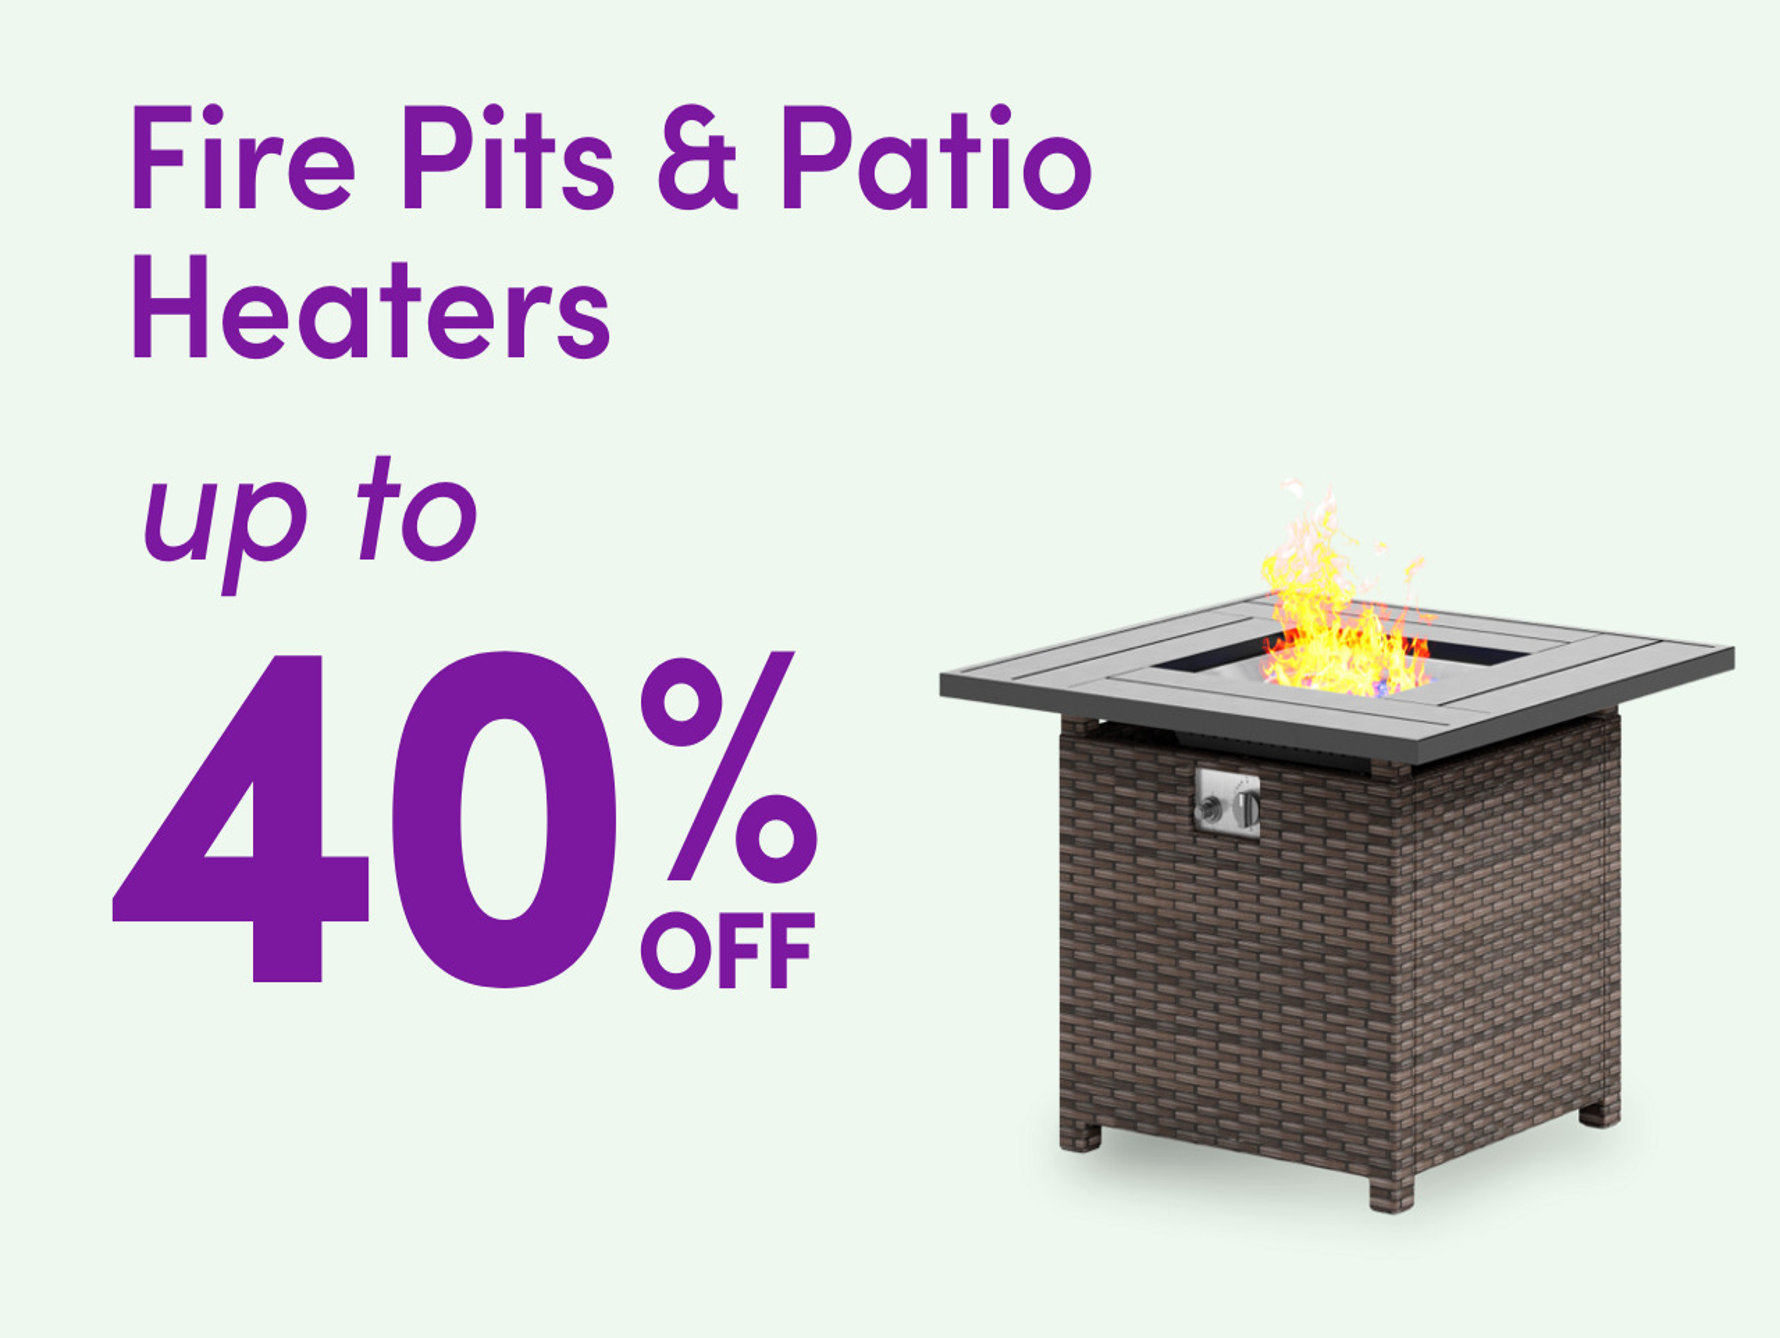 Fire Pits & Patio Heaters up to 40% off